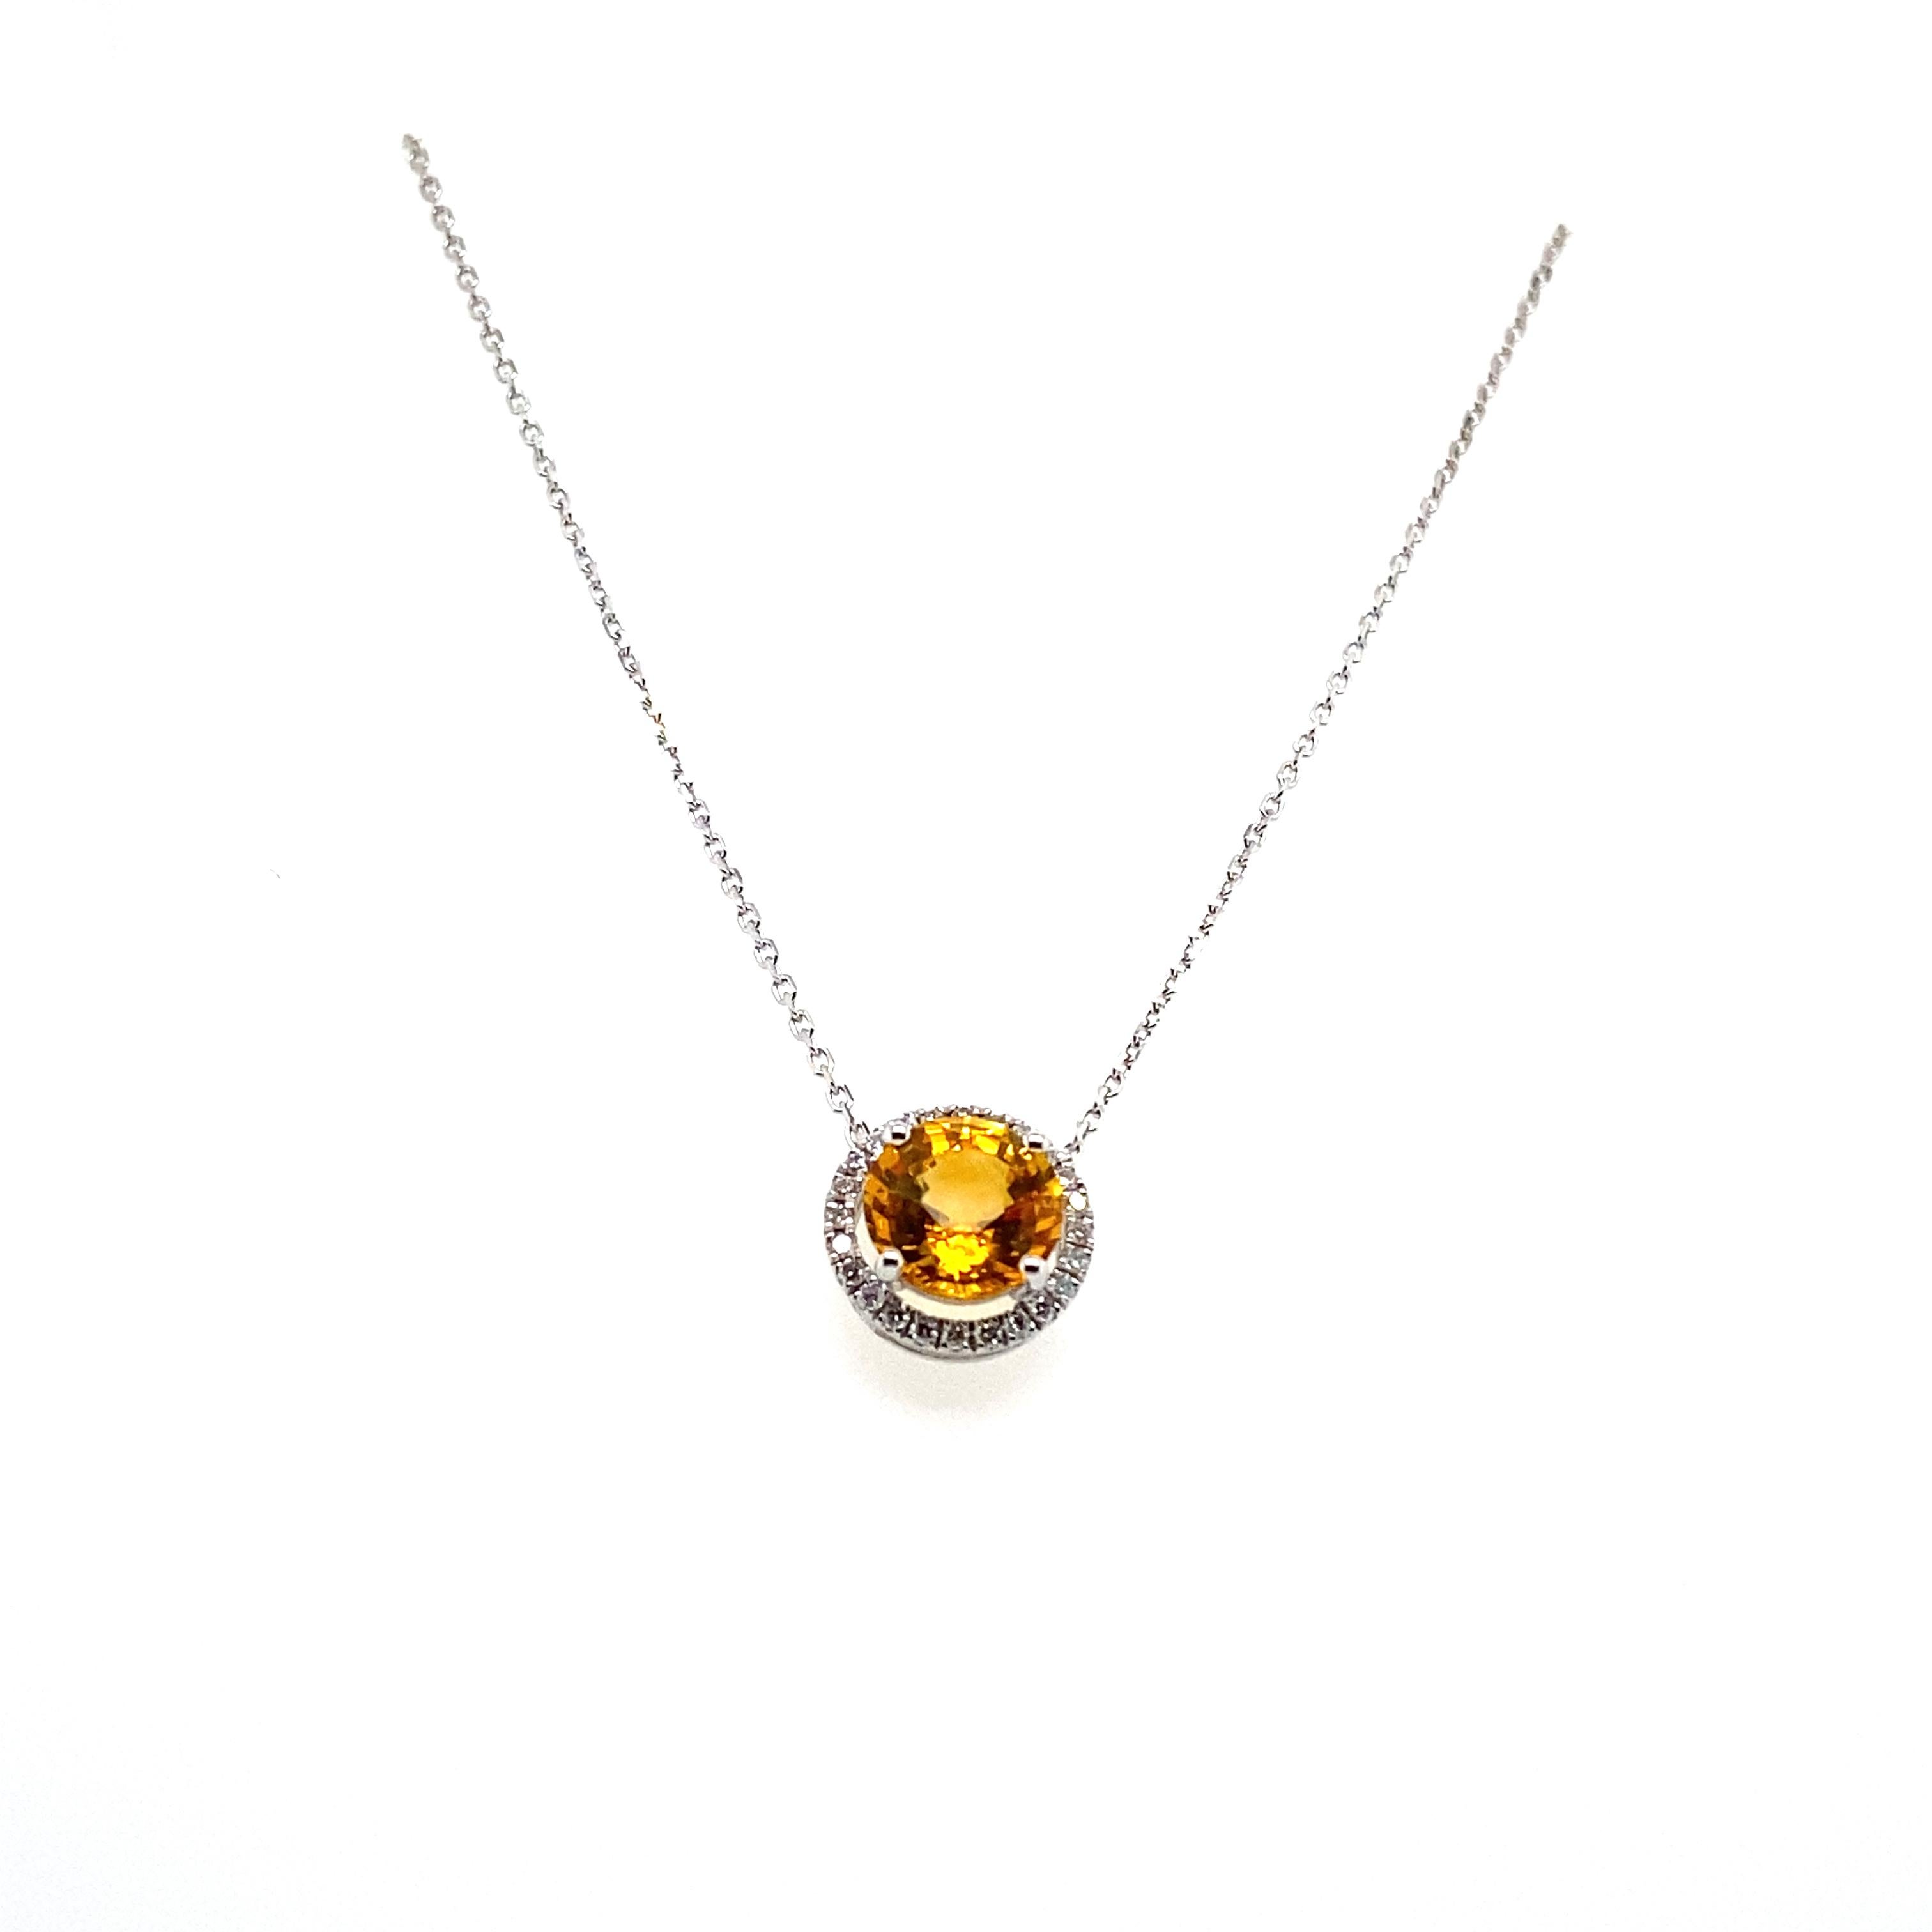 2.11 Carat Yellow Sapphire and Diamond Pendant Necklace For Sale 2